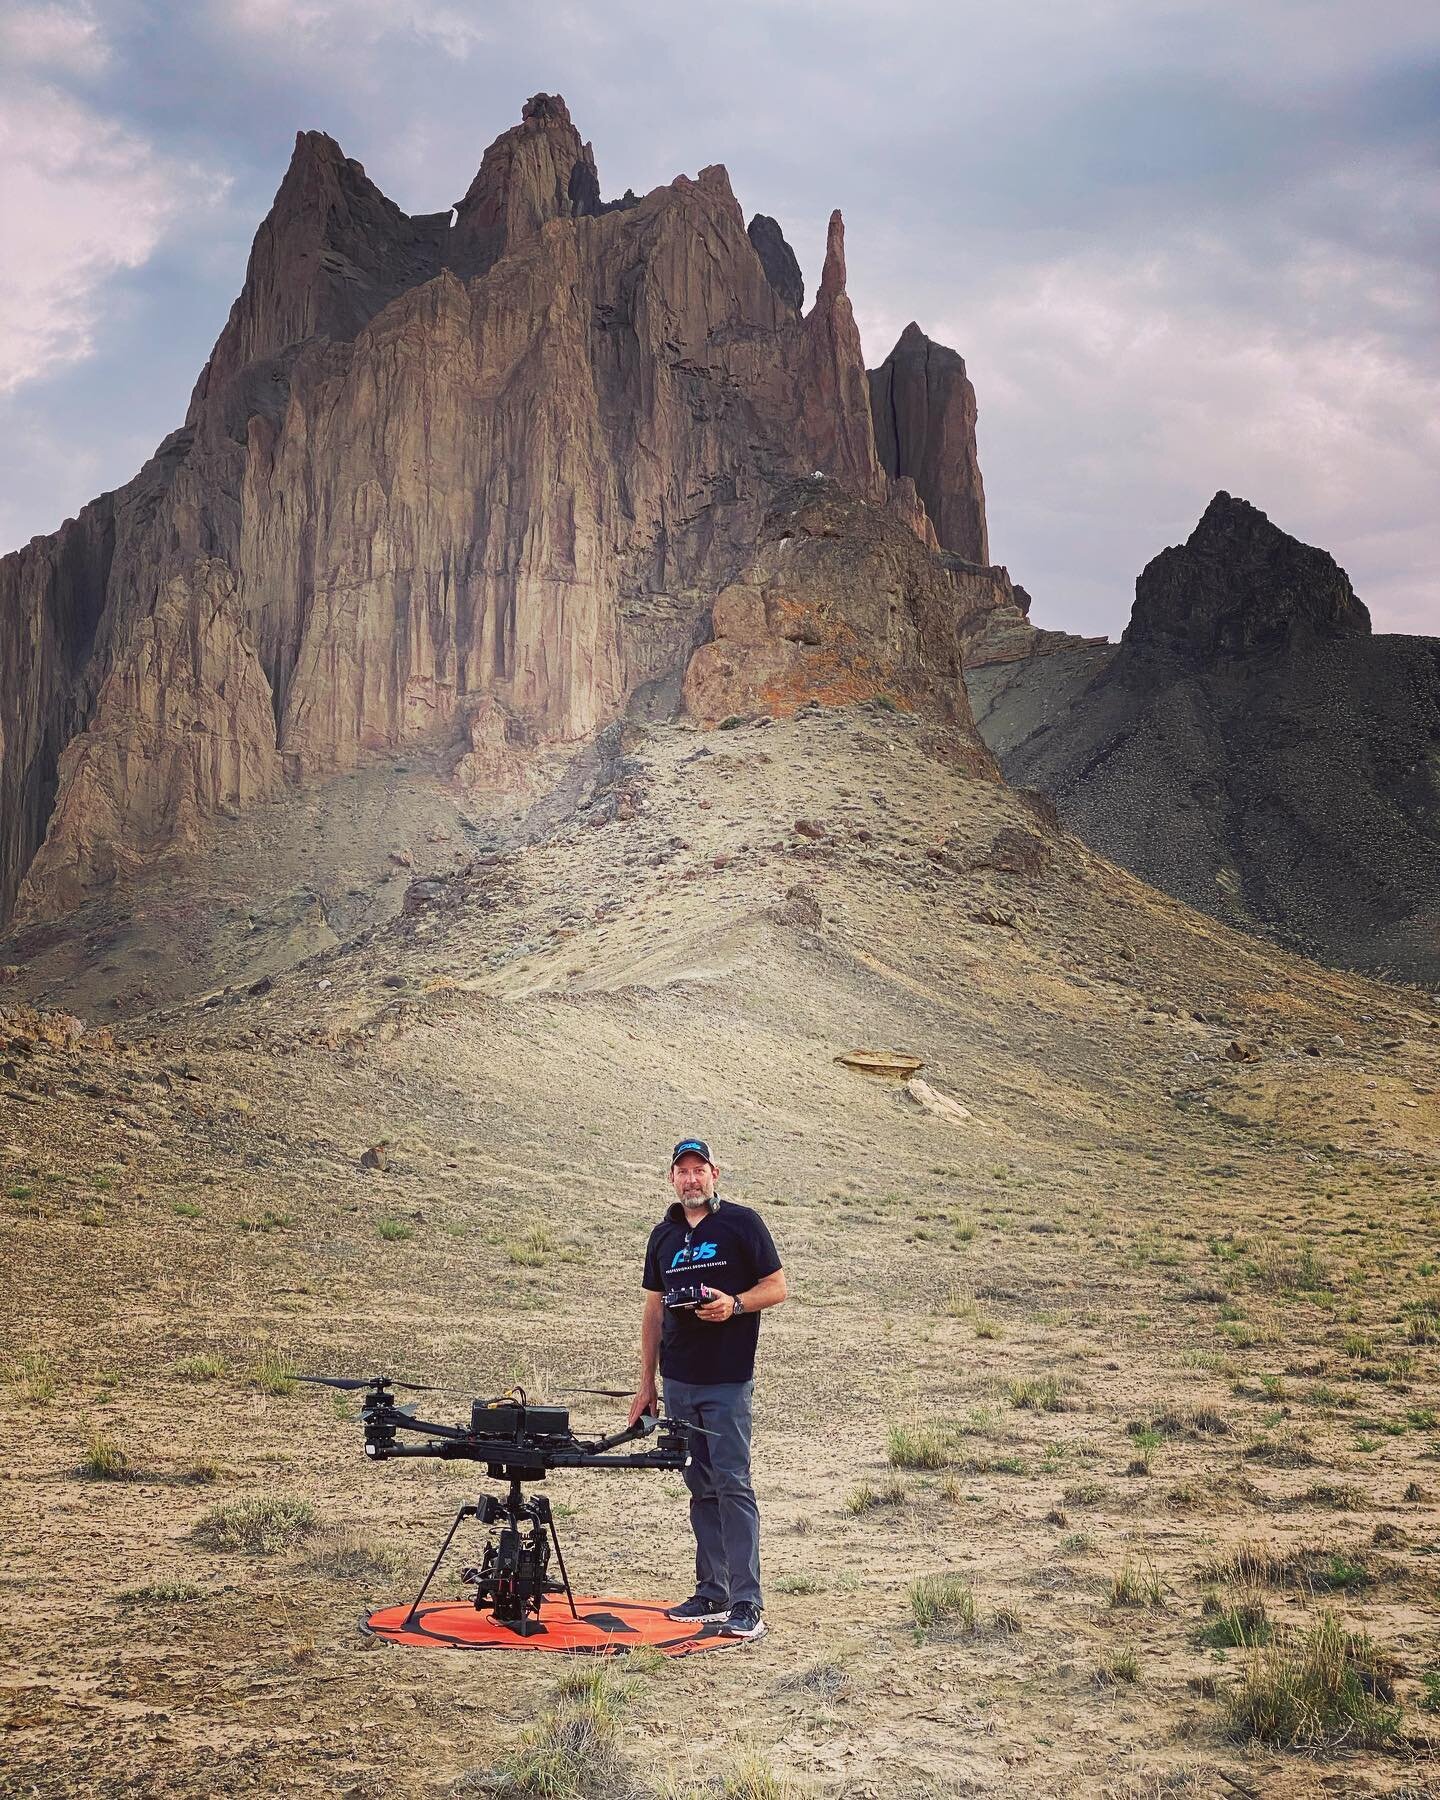 This is one of the most beautiful filming locations I have been to. Amazing!! #filminglocation #shiprock #altax #onset🎥🎬 @no_insta_jason @ignitedigiaustralia @freeflysystems